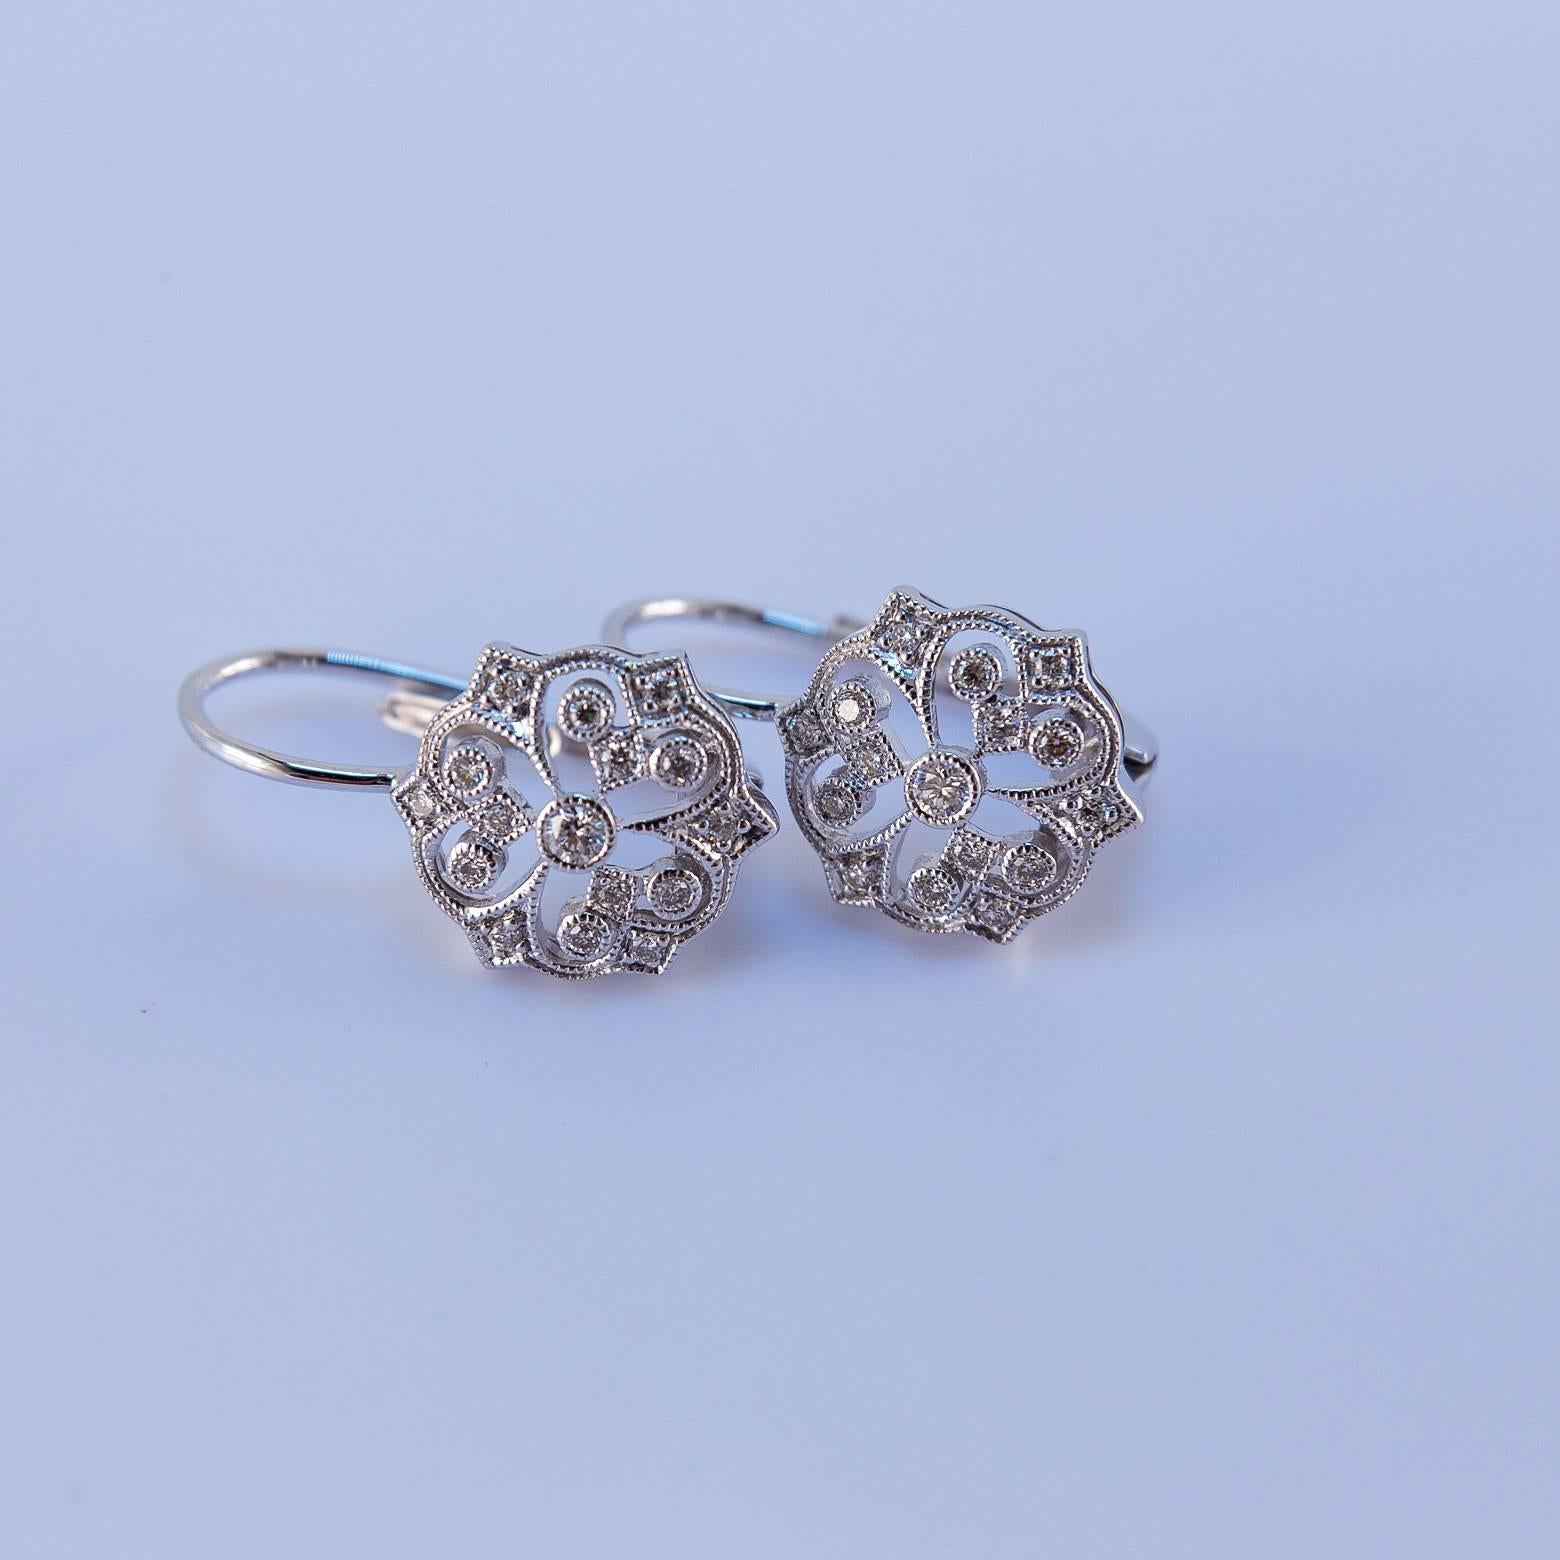 Beautiful and elegant diamond earrings with filigree and 14K white gold. These earrings are very intricate and detail-oriented with an extra sparkle. The white gold is absolutely stunning and acts to reflect the clarity of the diamonds. 